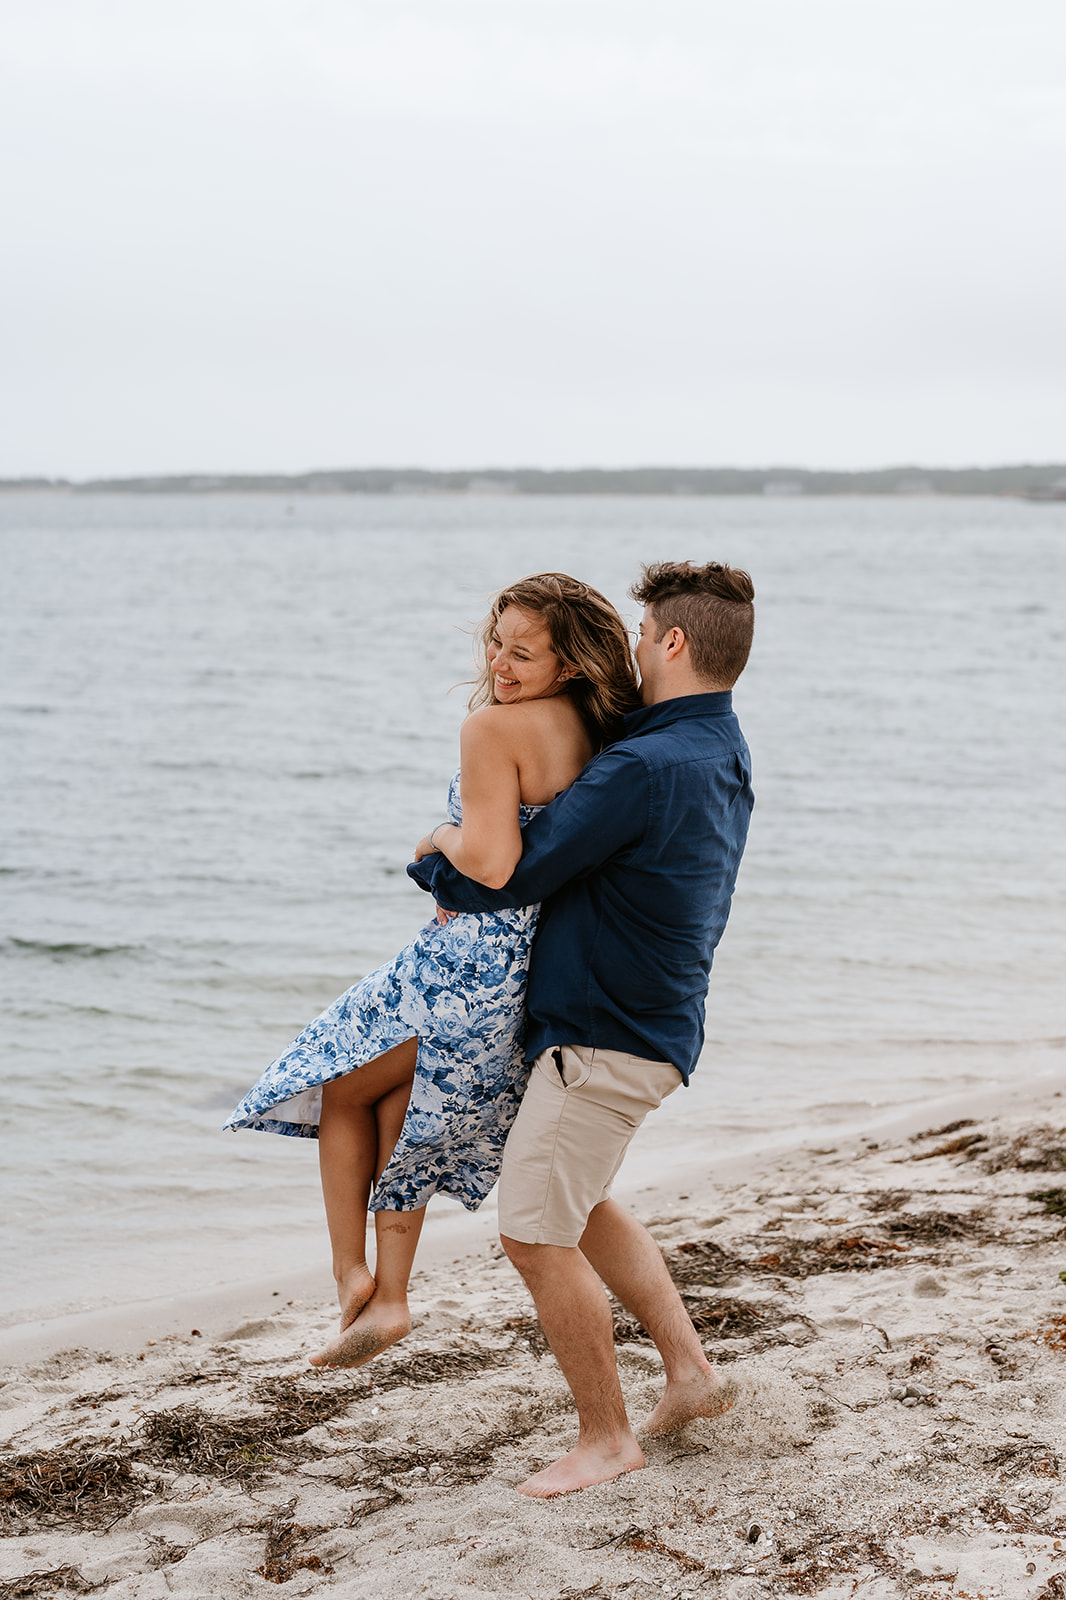 A couple holding hands and running barefoot along a sandy beach in Martha's Vineyard with boats in the background.